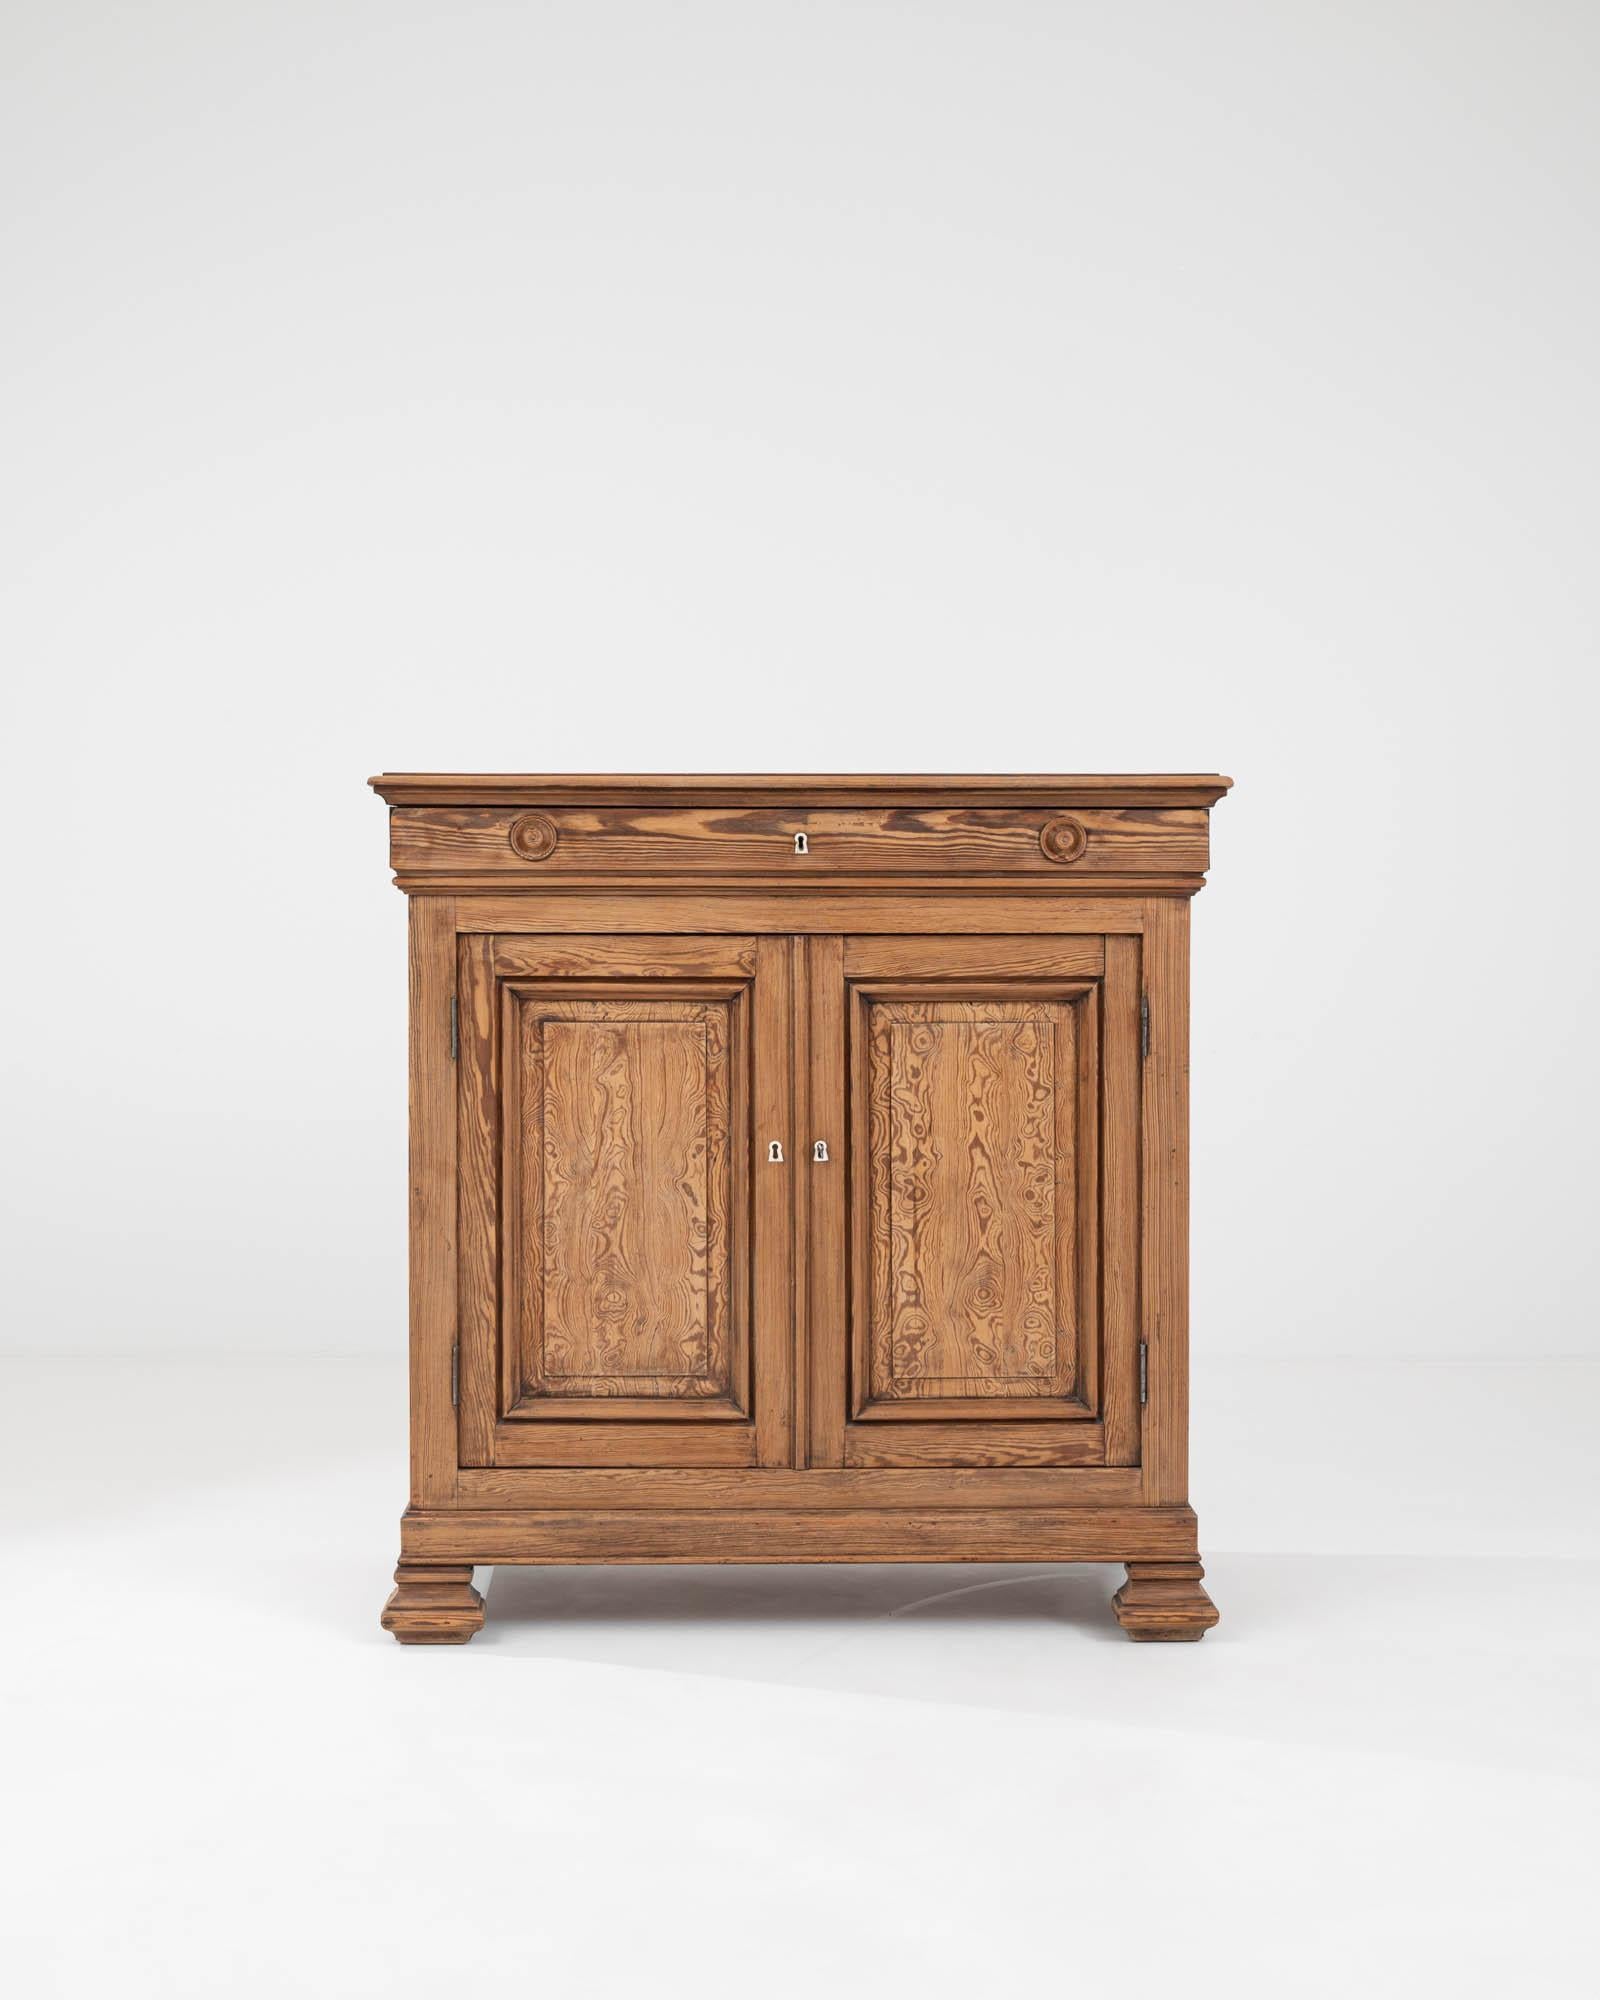 Introducing our exquisite 19th Century French Wooden Buffet, a testament to timeless elegance and functional design. Crafted with meticulous attention to detail, this stunning piece features a classic silhouette adorned with beautiful wood grain and